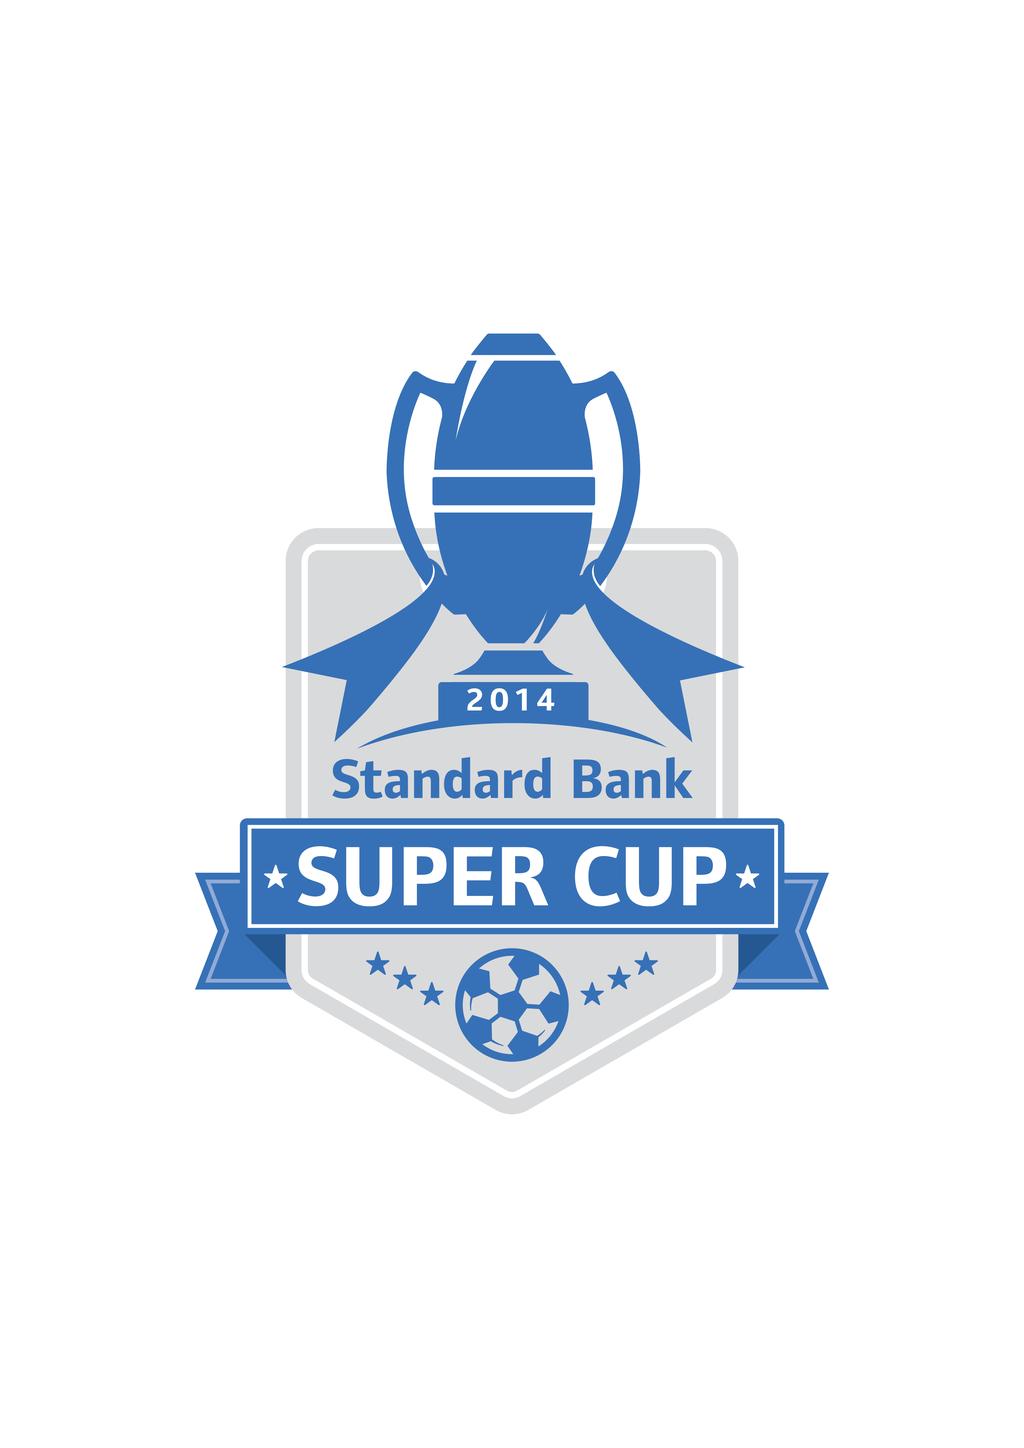 Content RULES AND REGULATIONS 2014/2015 Content Page Article 1: THE STANDARD BANK SUPER CUP 2 Article 2: FORM OF THE COMPETITION 2 Article 3: ORGANIZATION AND DISCIPLINE 2 Article 4: ARBITRATION 3